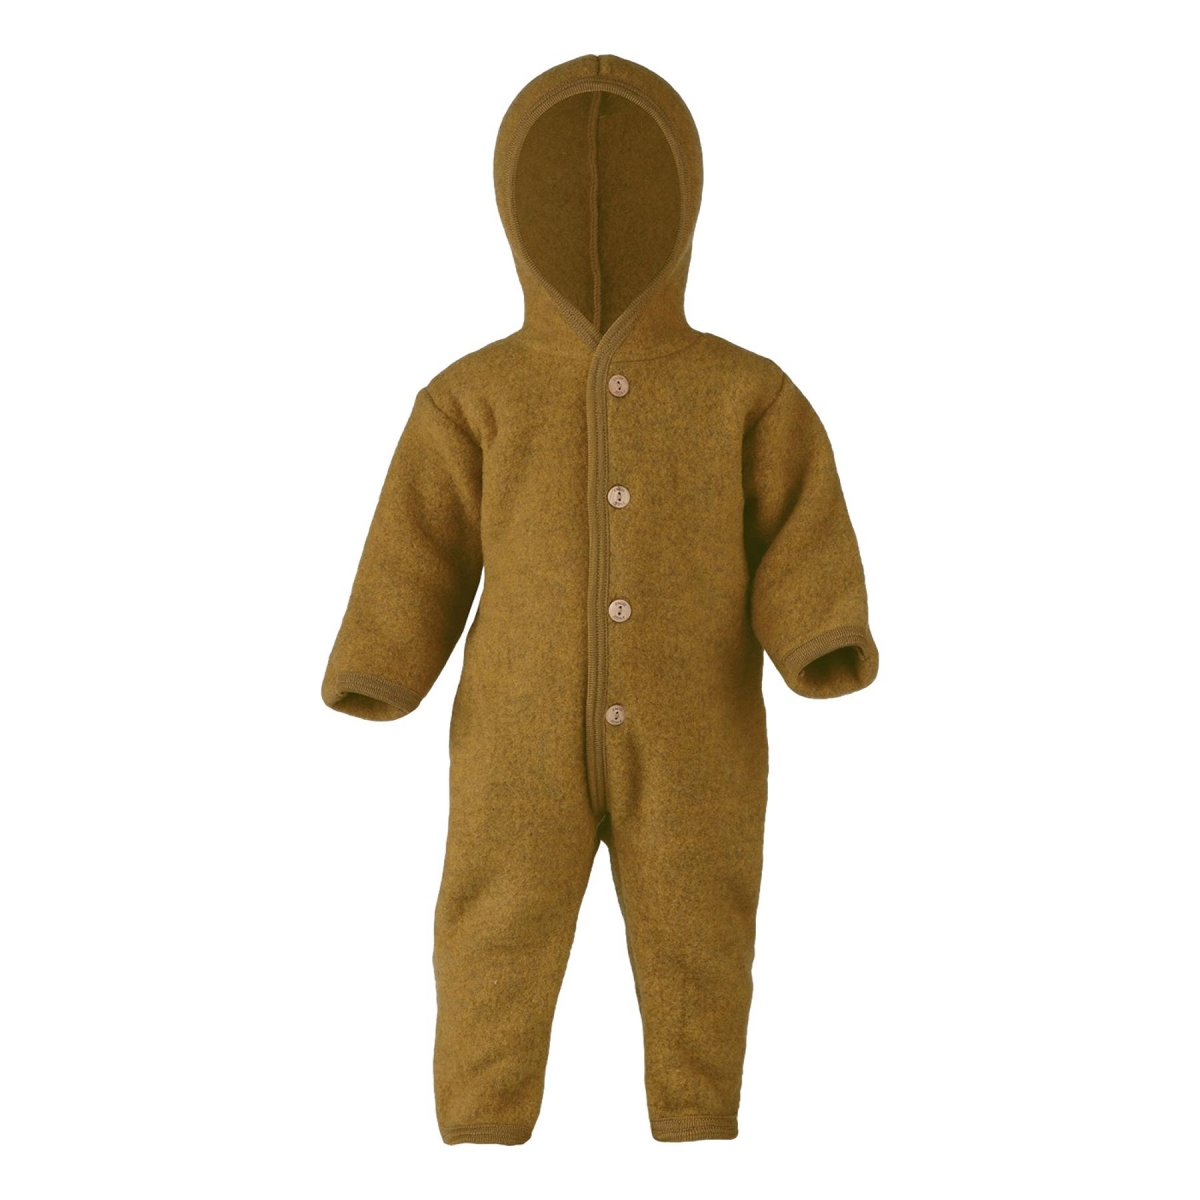 ENGEL Natur Hooded overall with buttons Saffron melange 575722-018E 